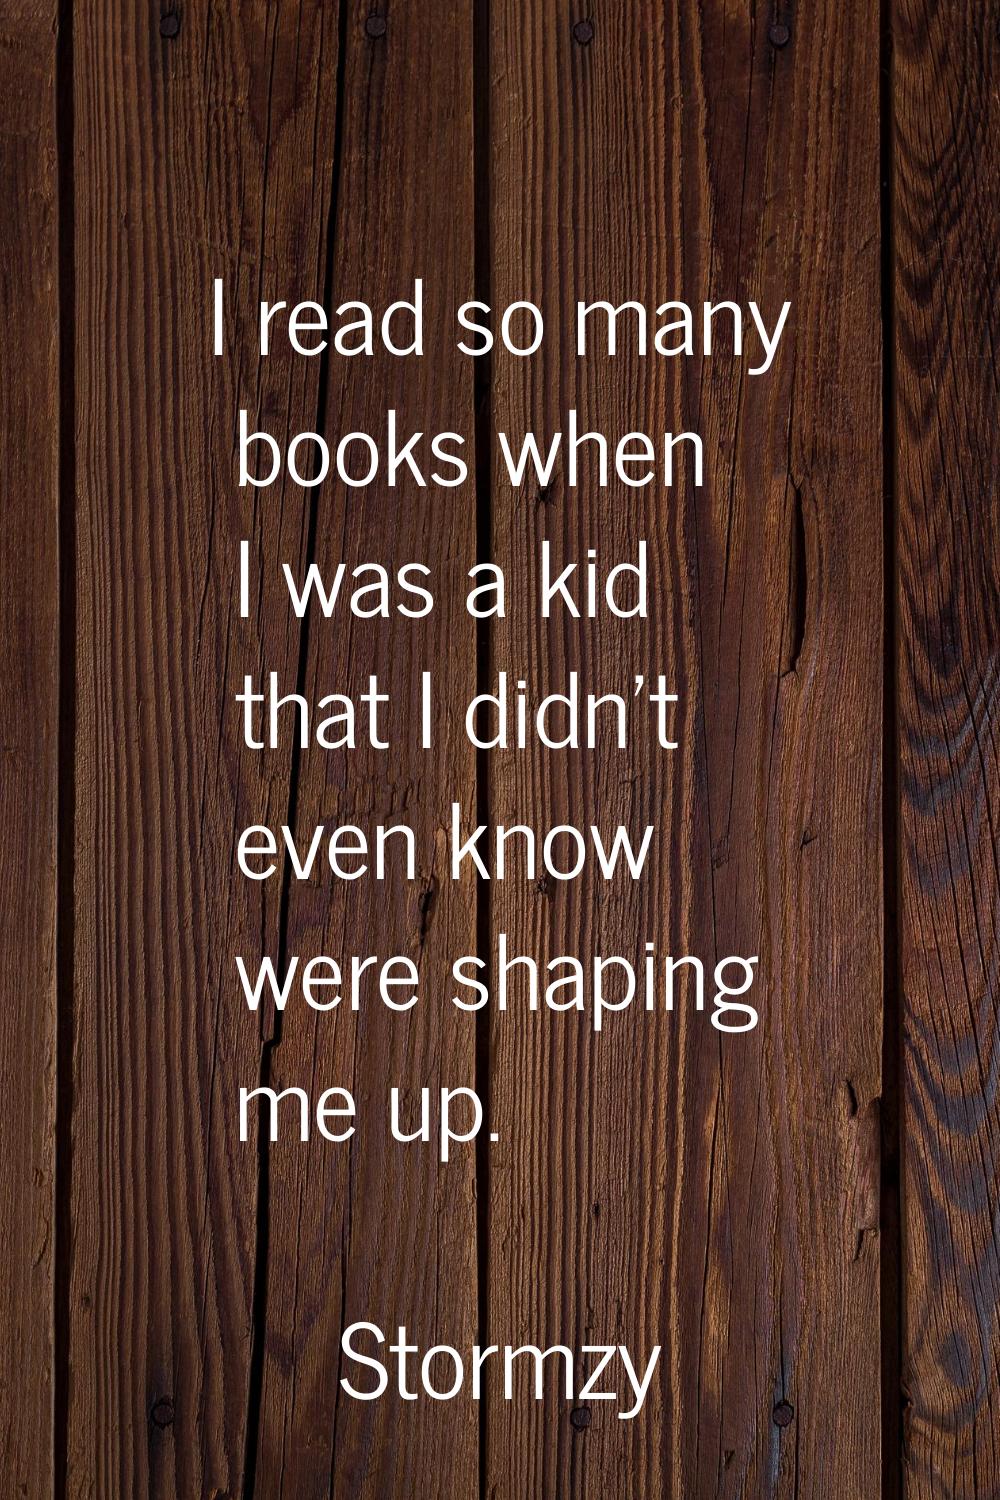 I read so many books when I was a kid that I didn't even know were shaping me up.